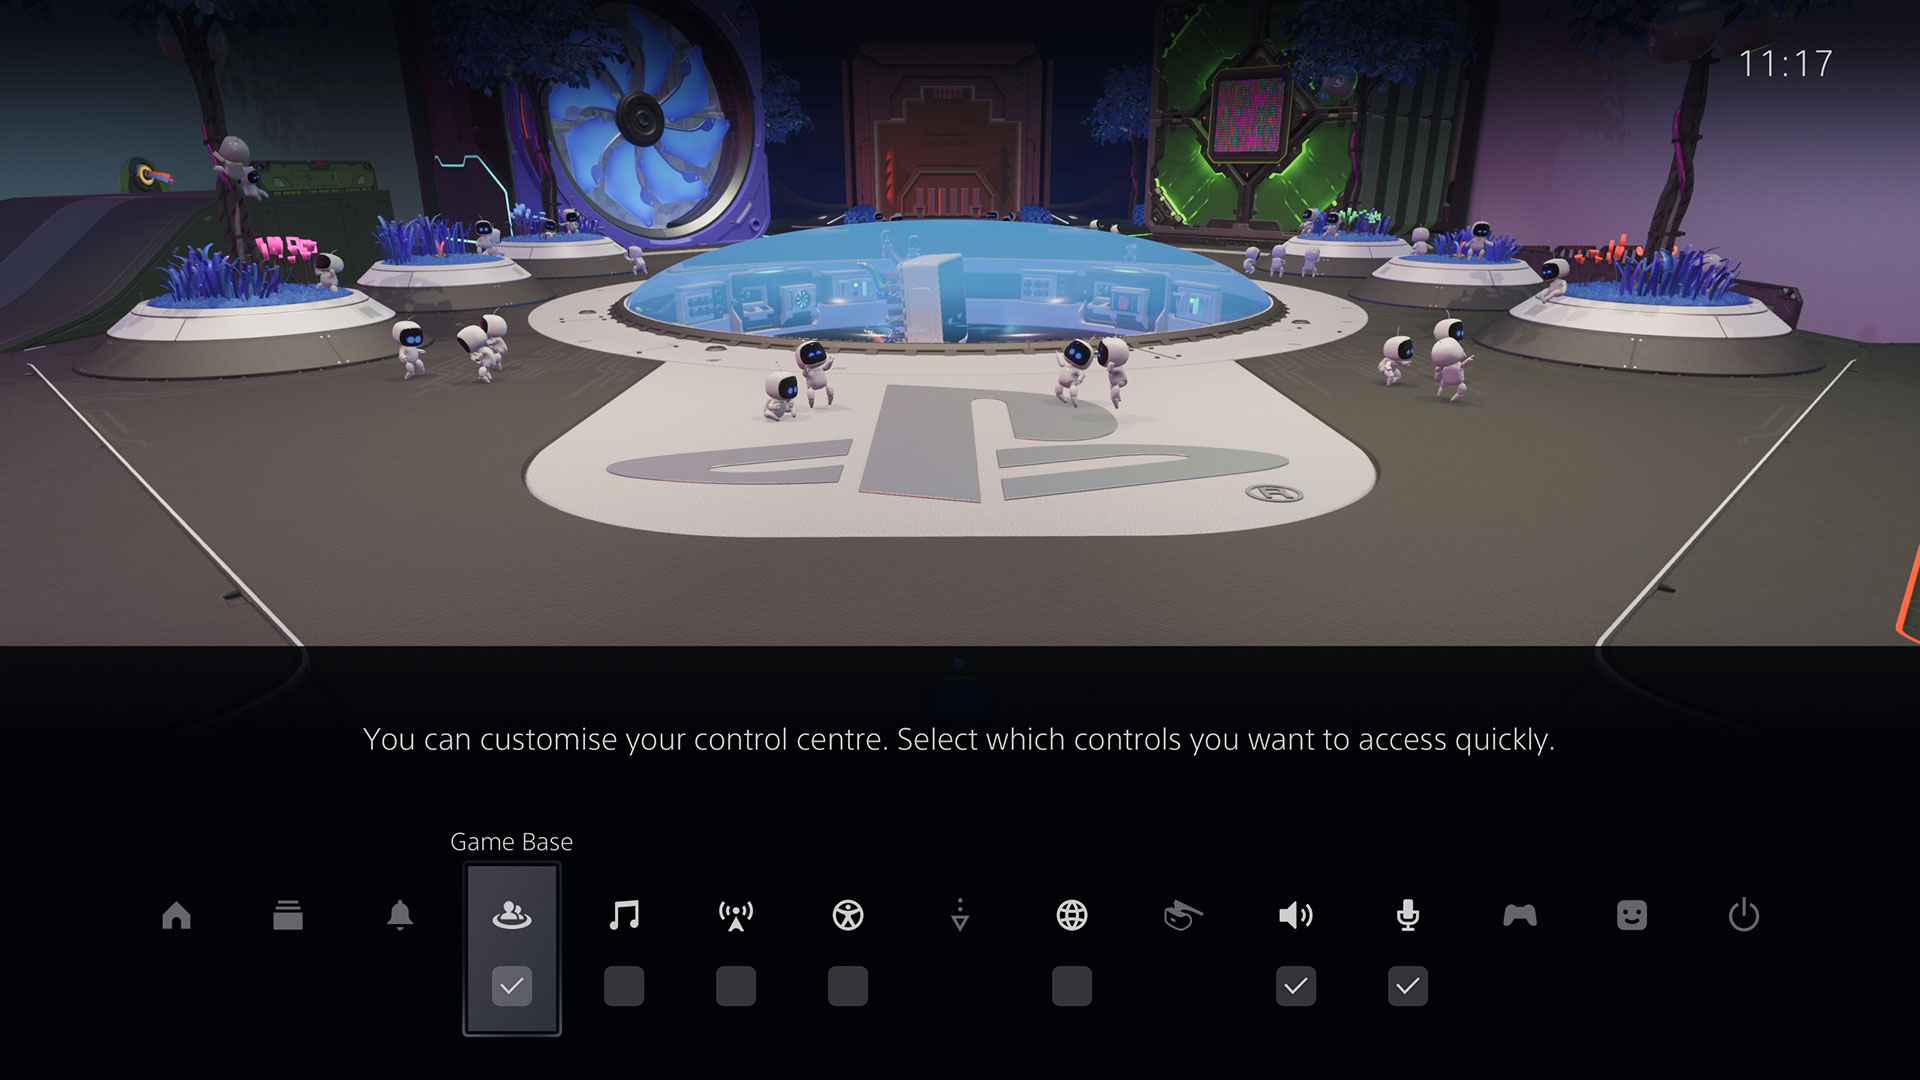 Game base on PS5 control center